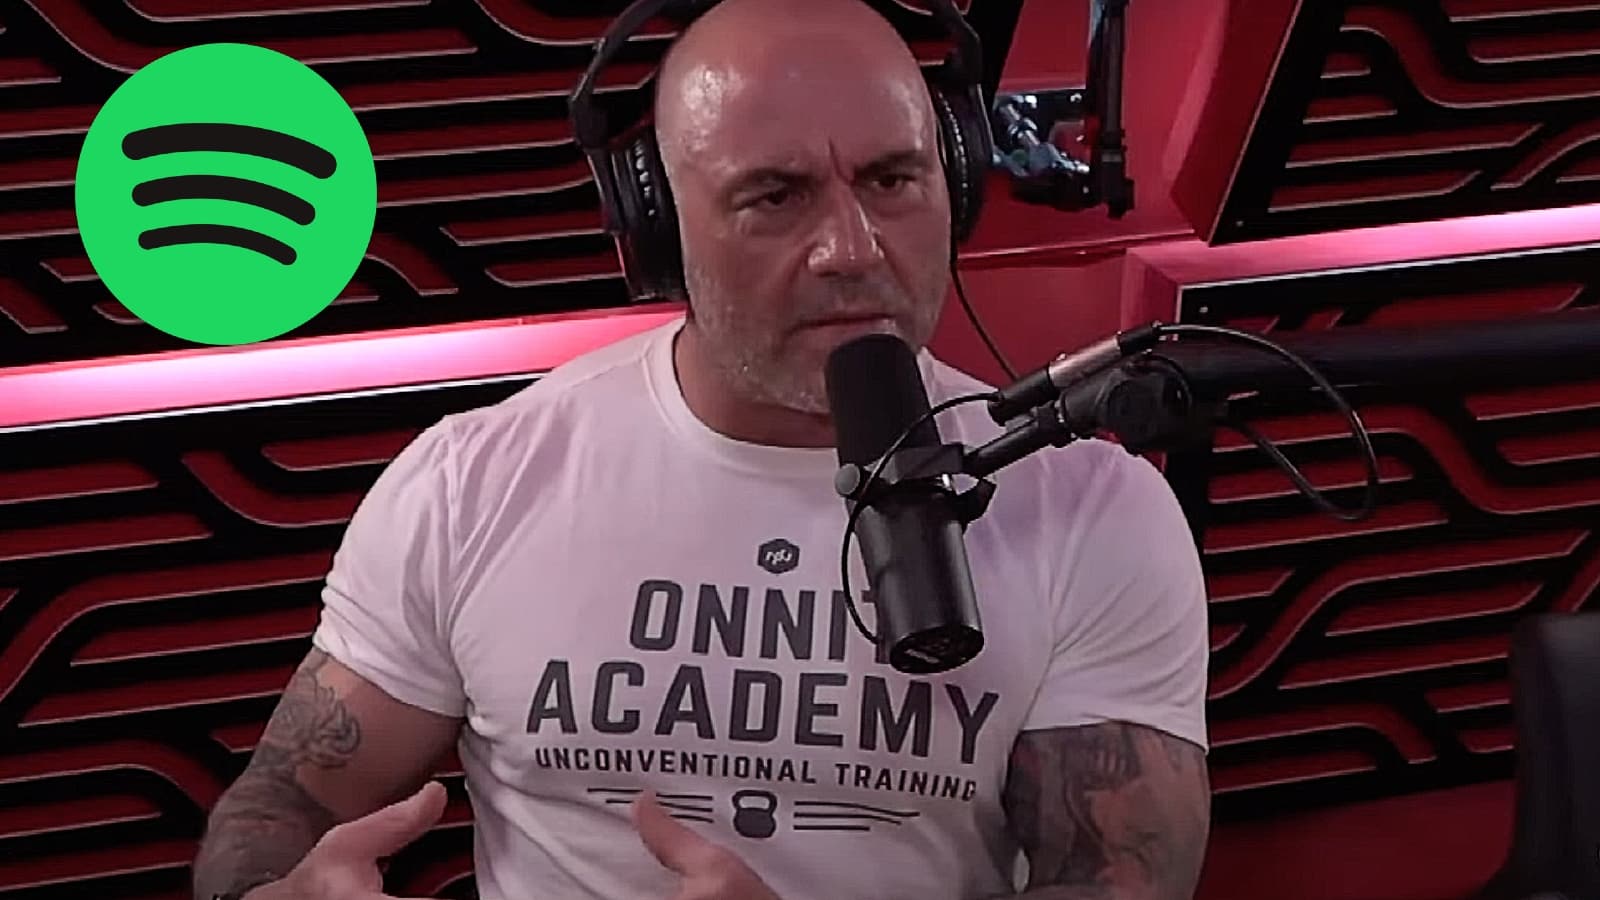 Joe Rogan Experience podcast Spotify episodes removed